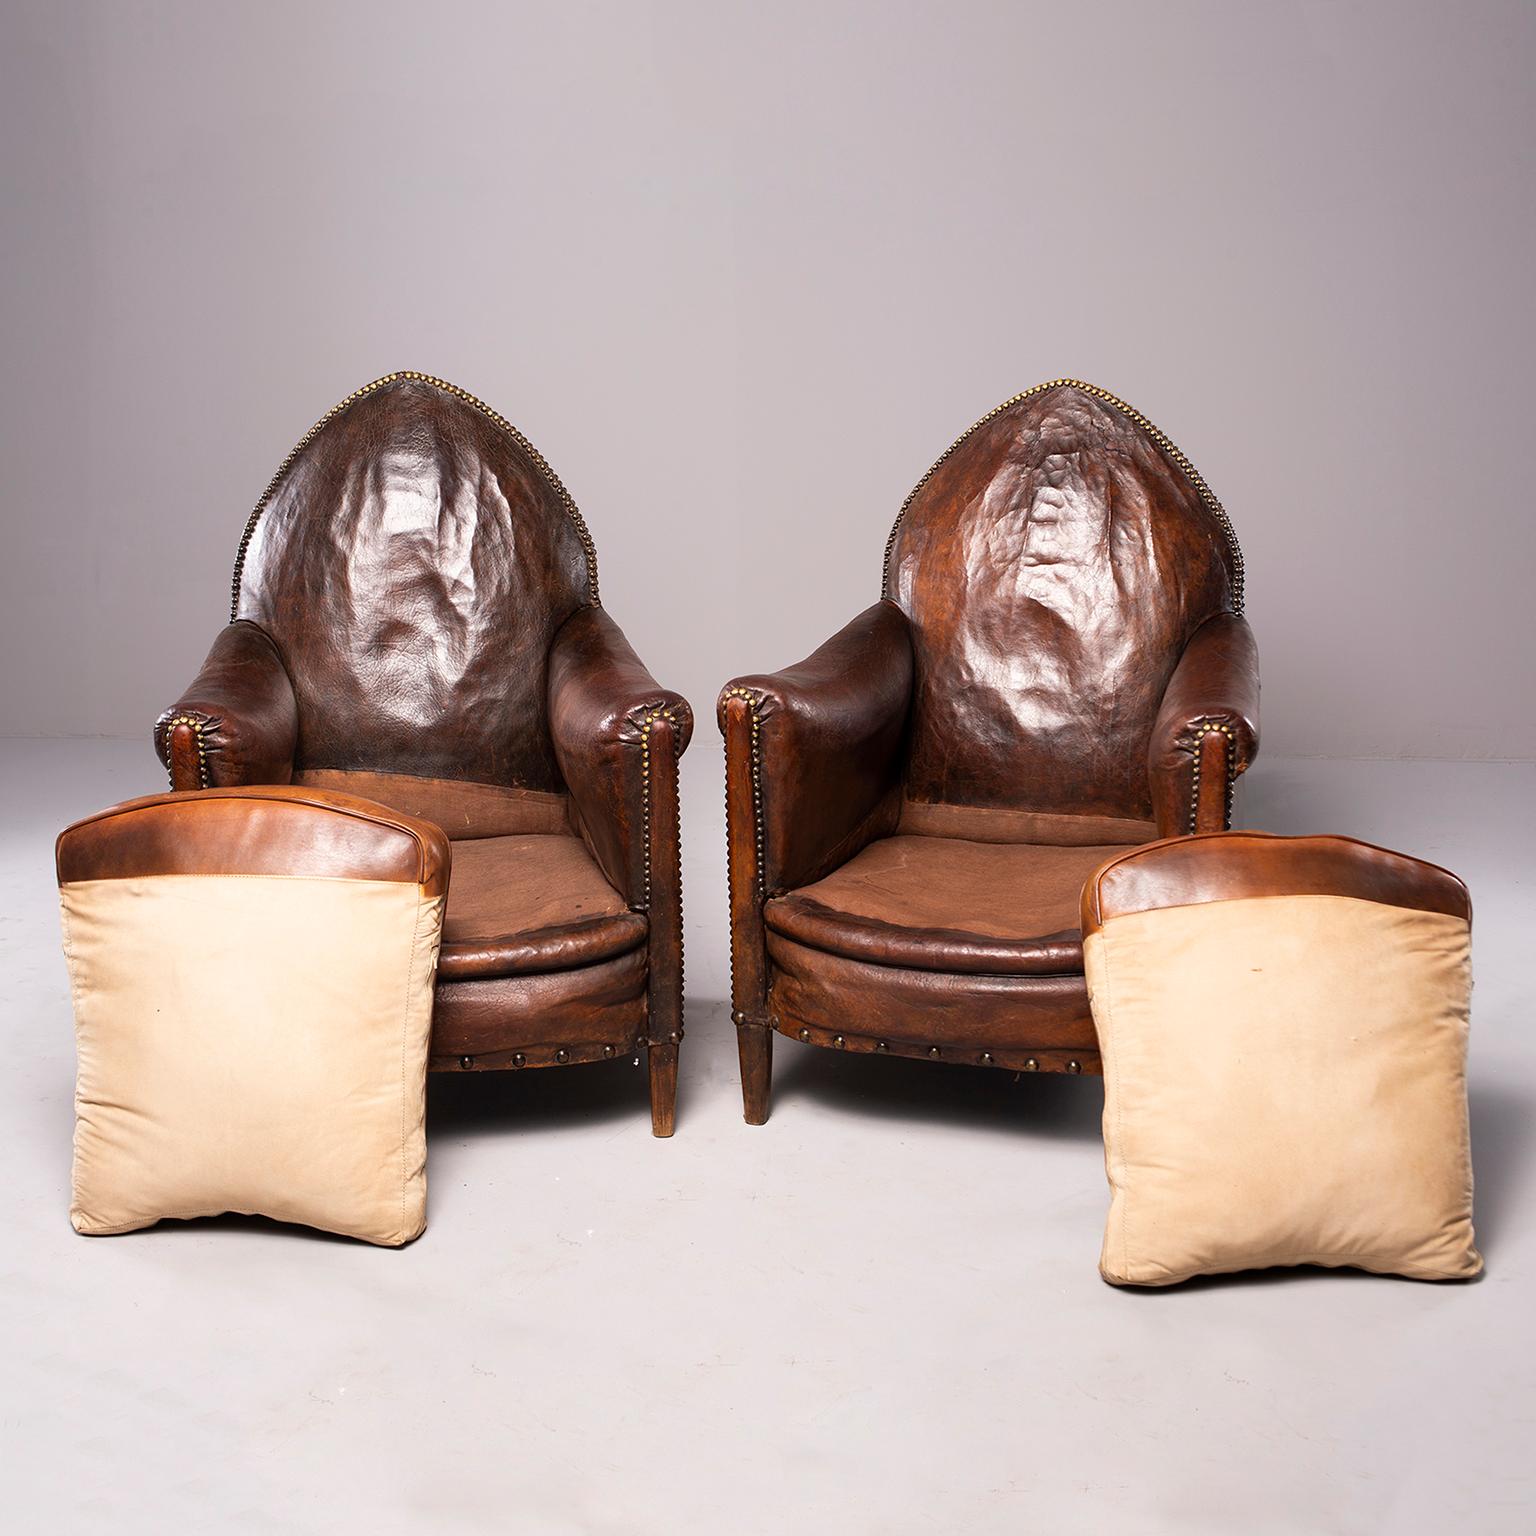 Pair of Dark Leather French Art Deco Club Chairs in Original Condition 9